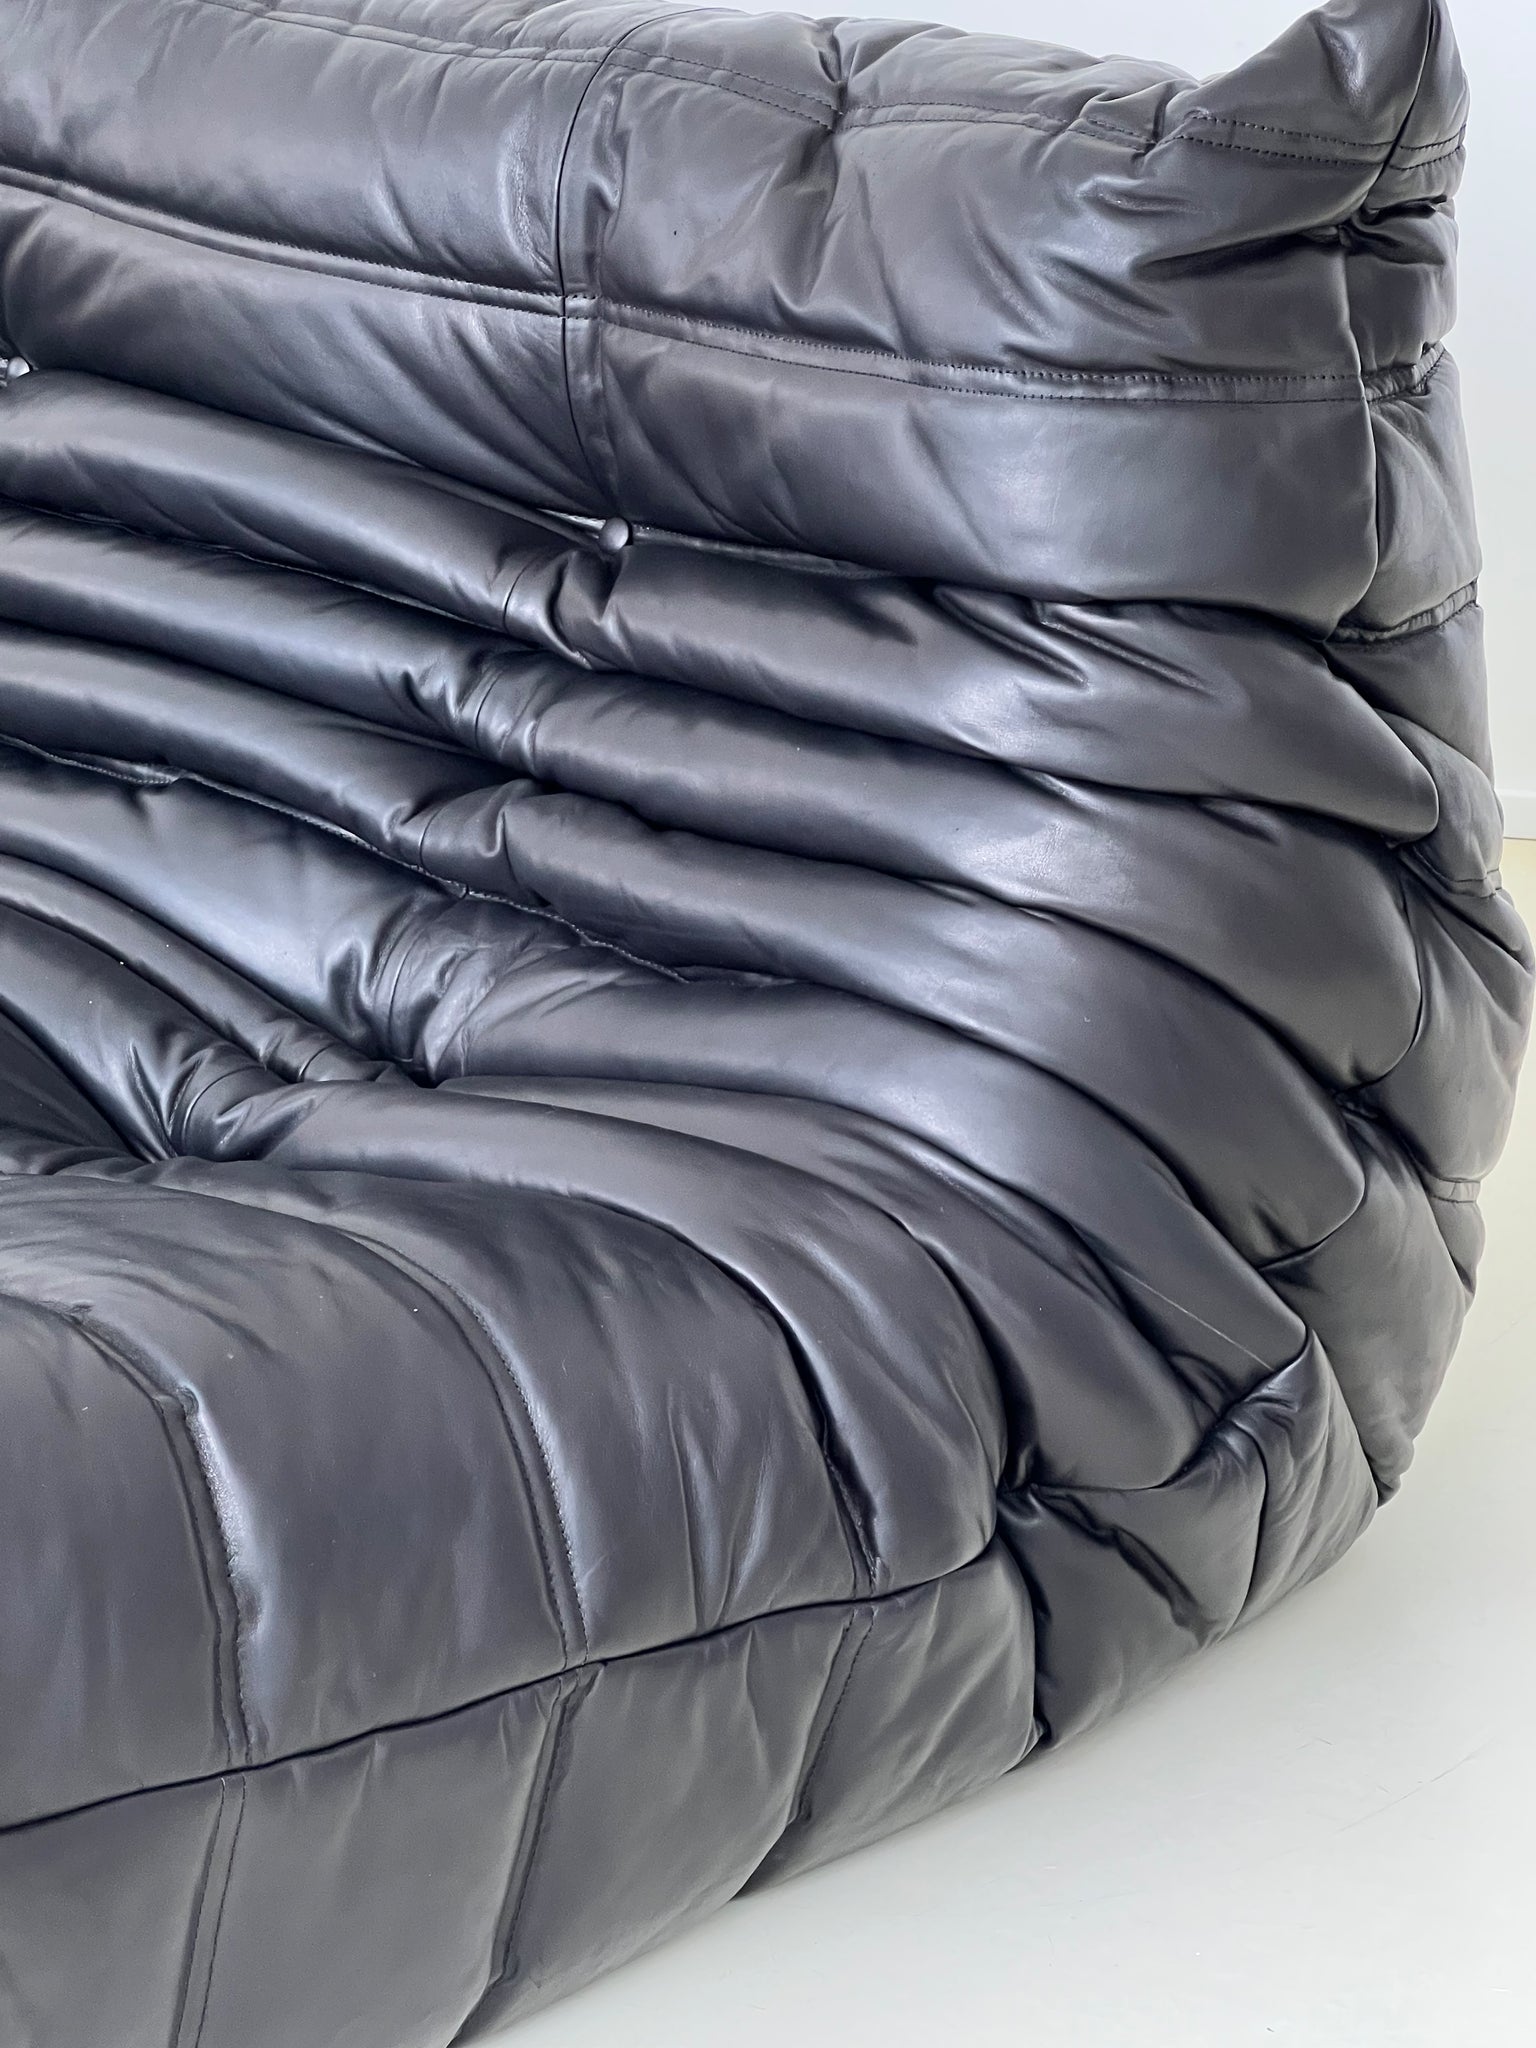 Black Leather Togo Sofa by Michel Ducaroy for Linge Roset – Home Union NYC